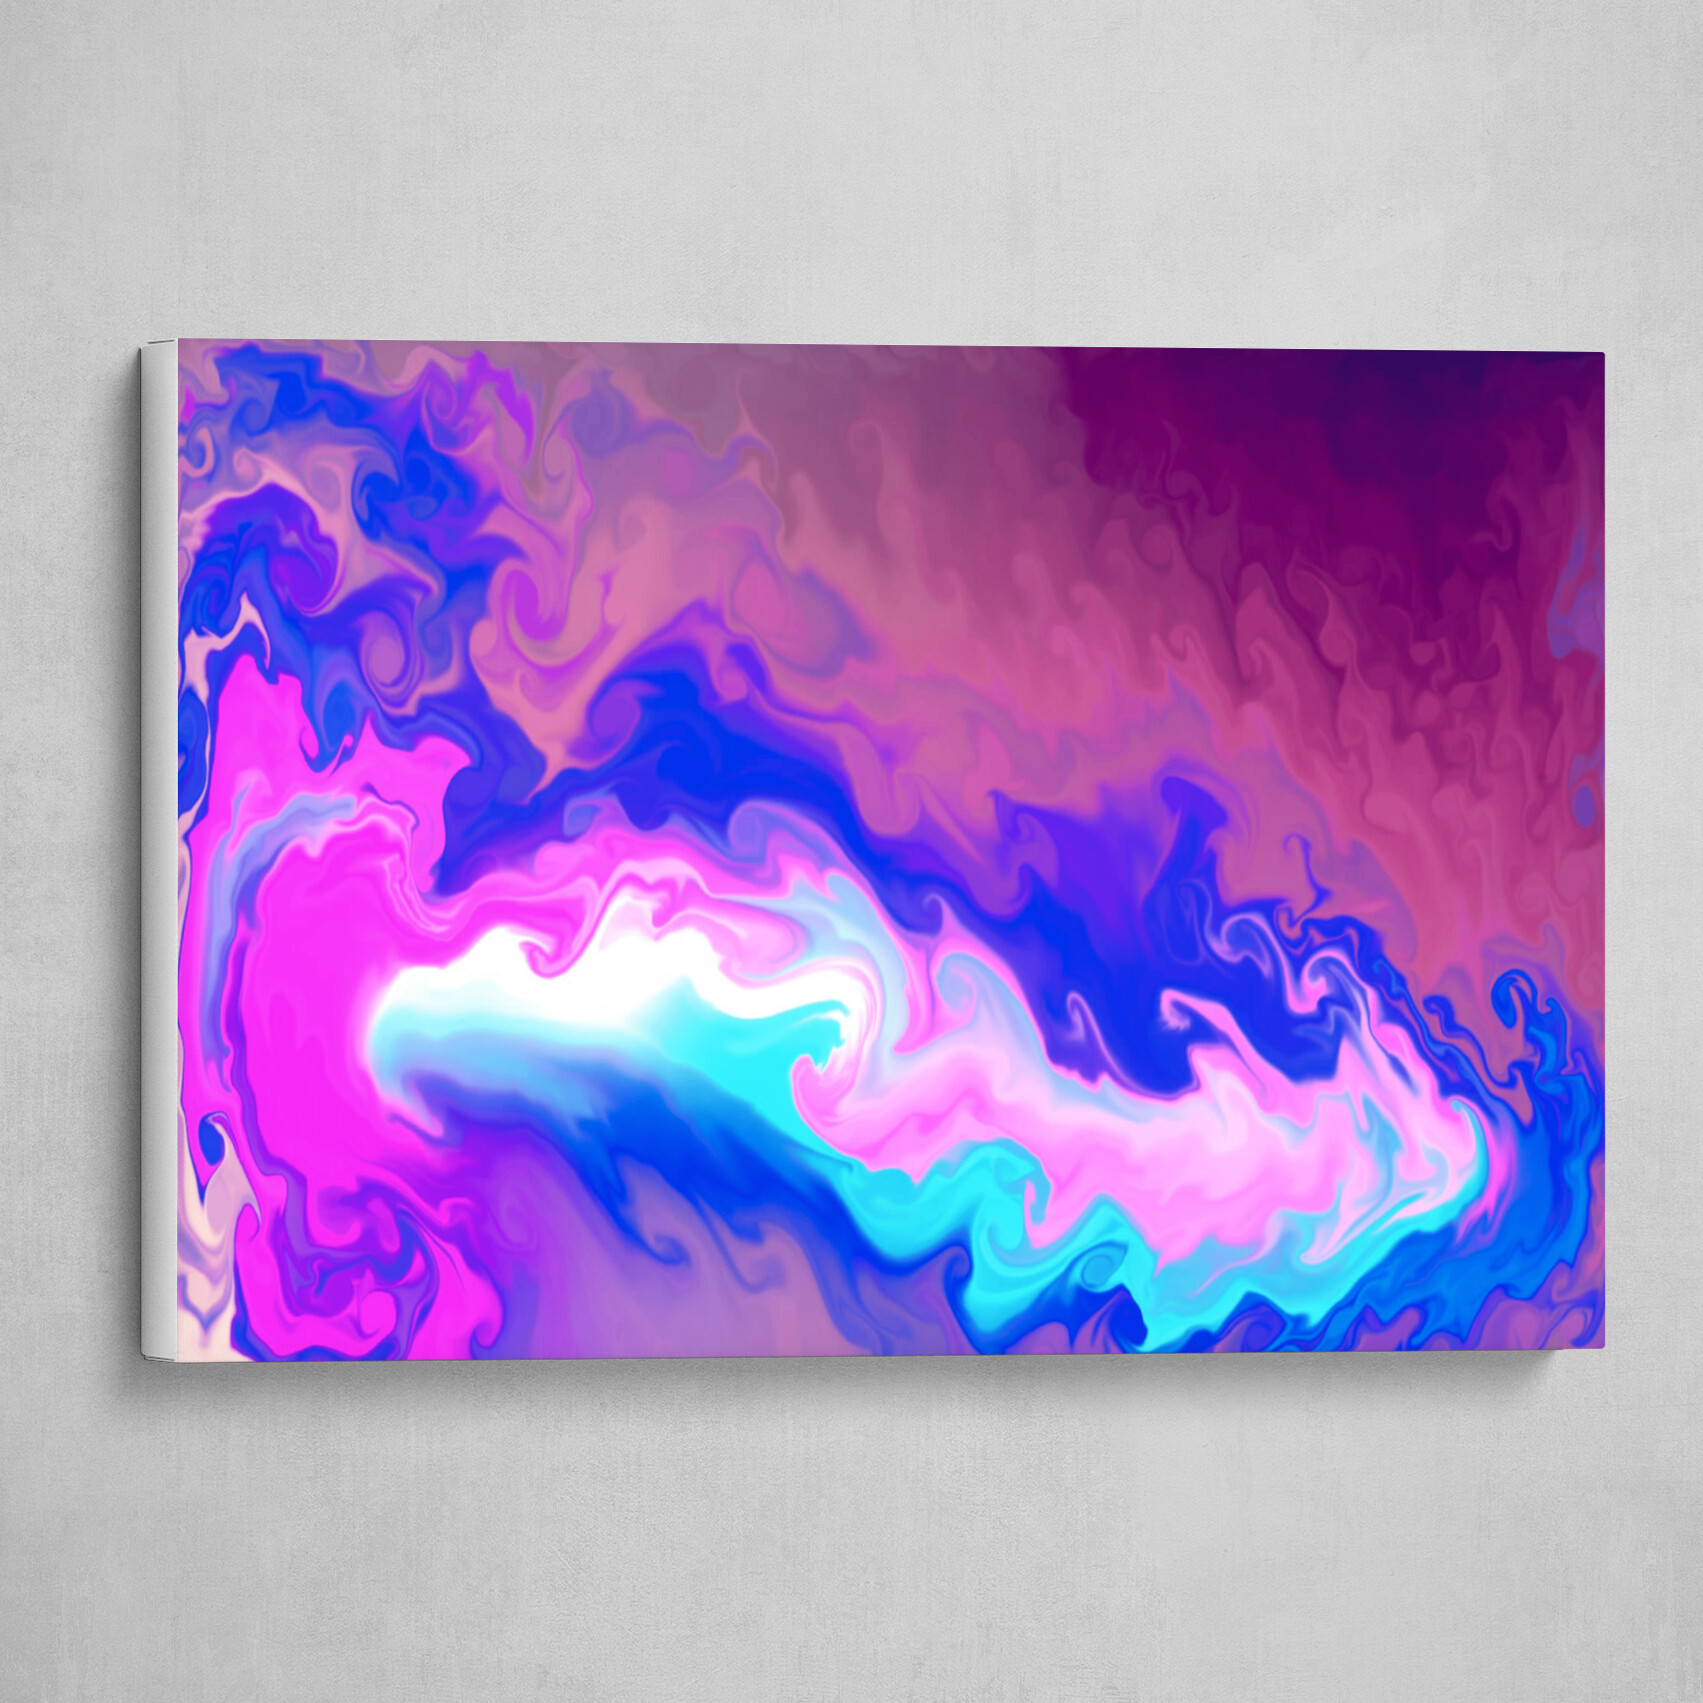 Violet Visions in Azure abstract 3